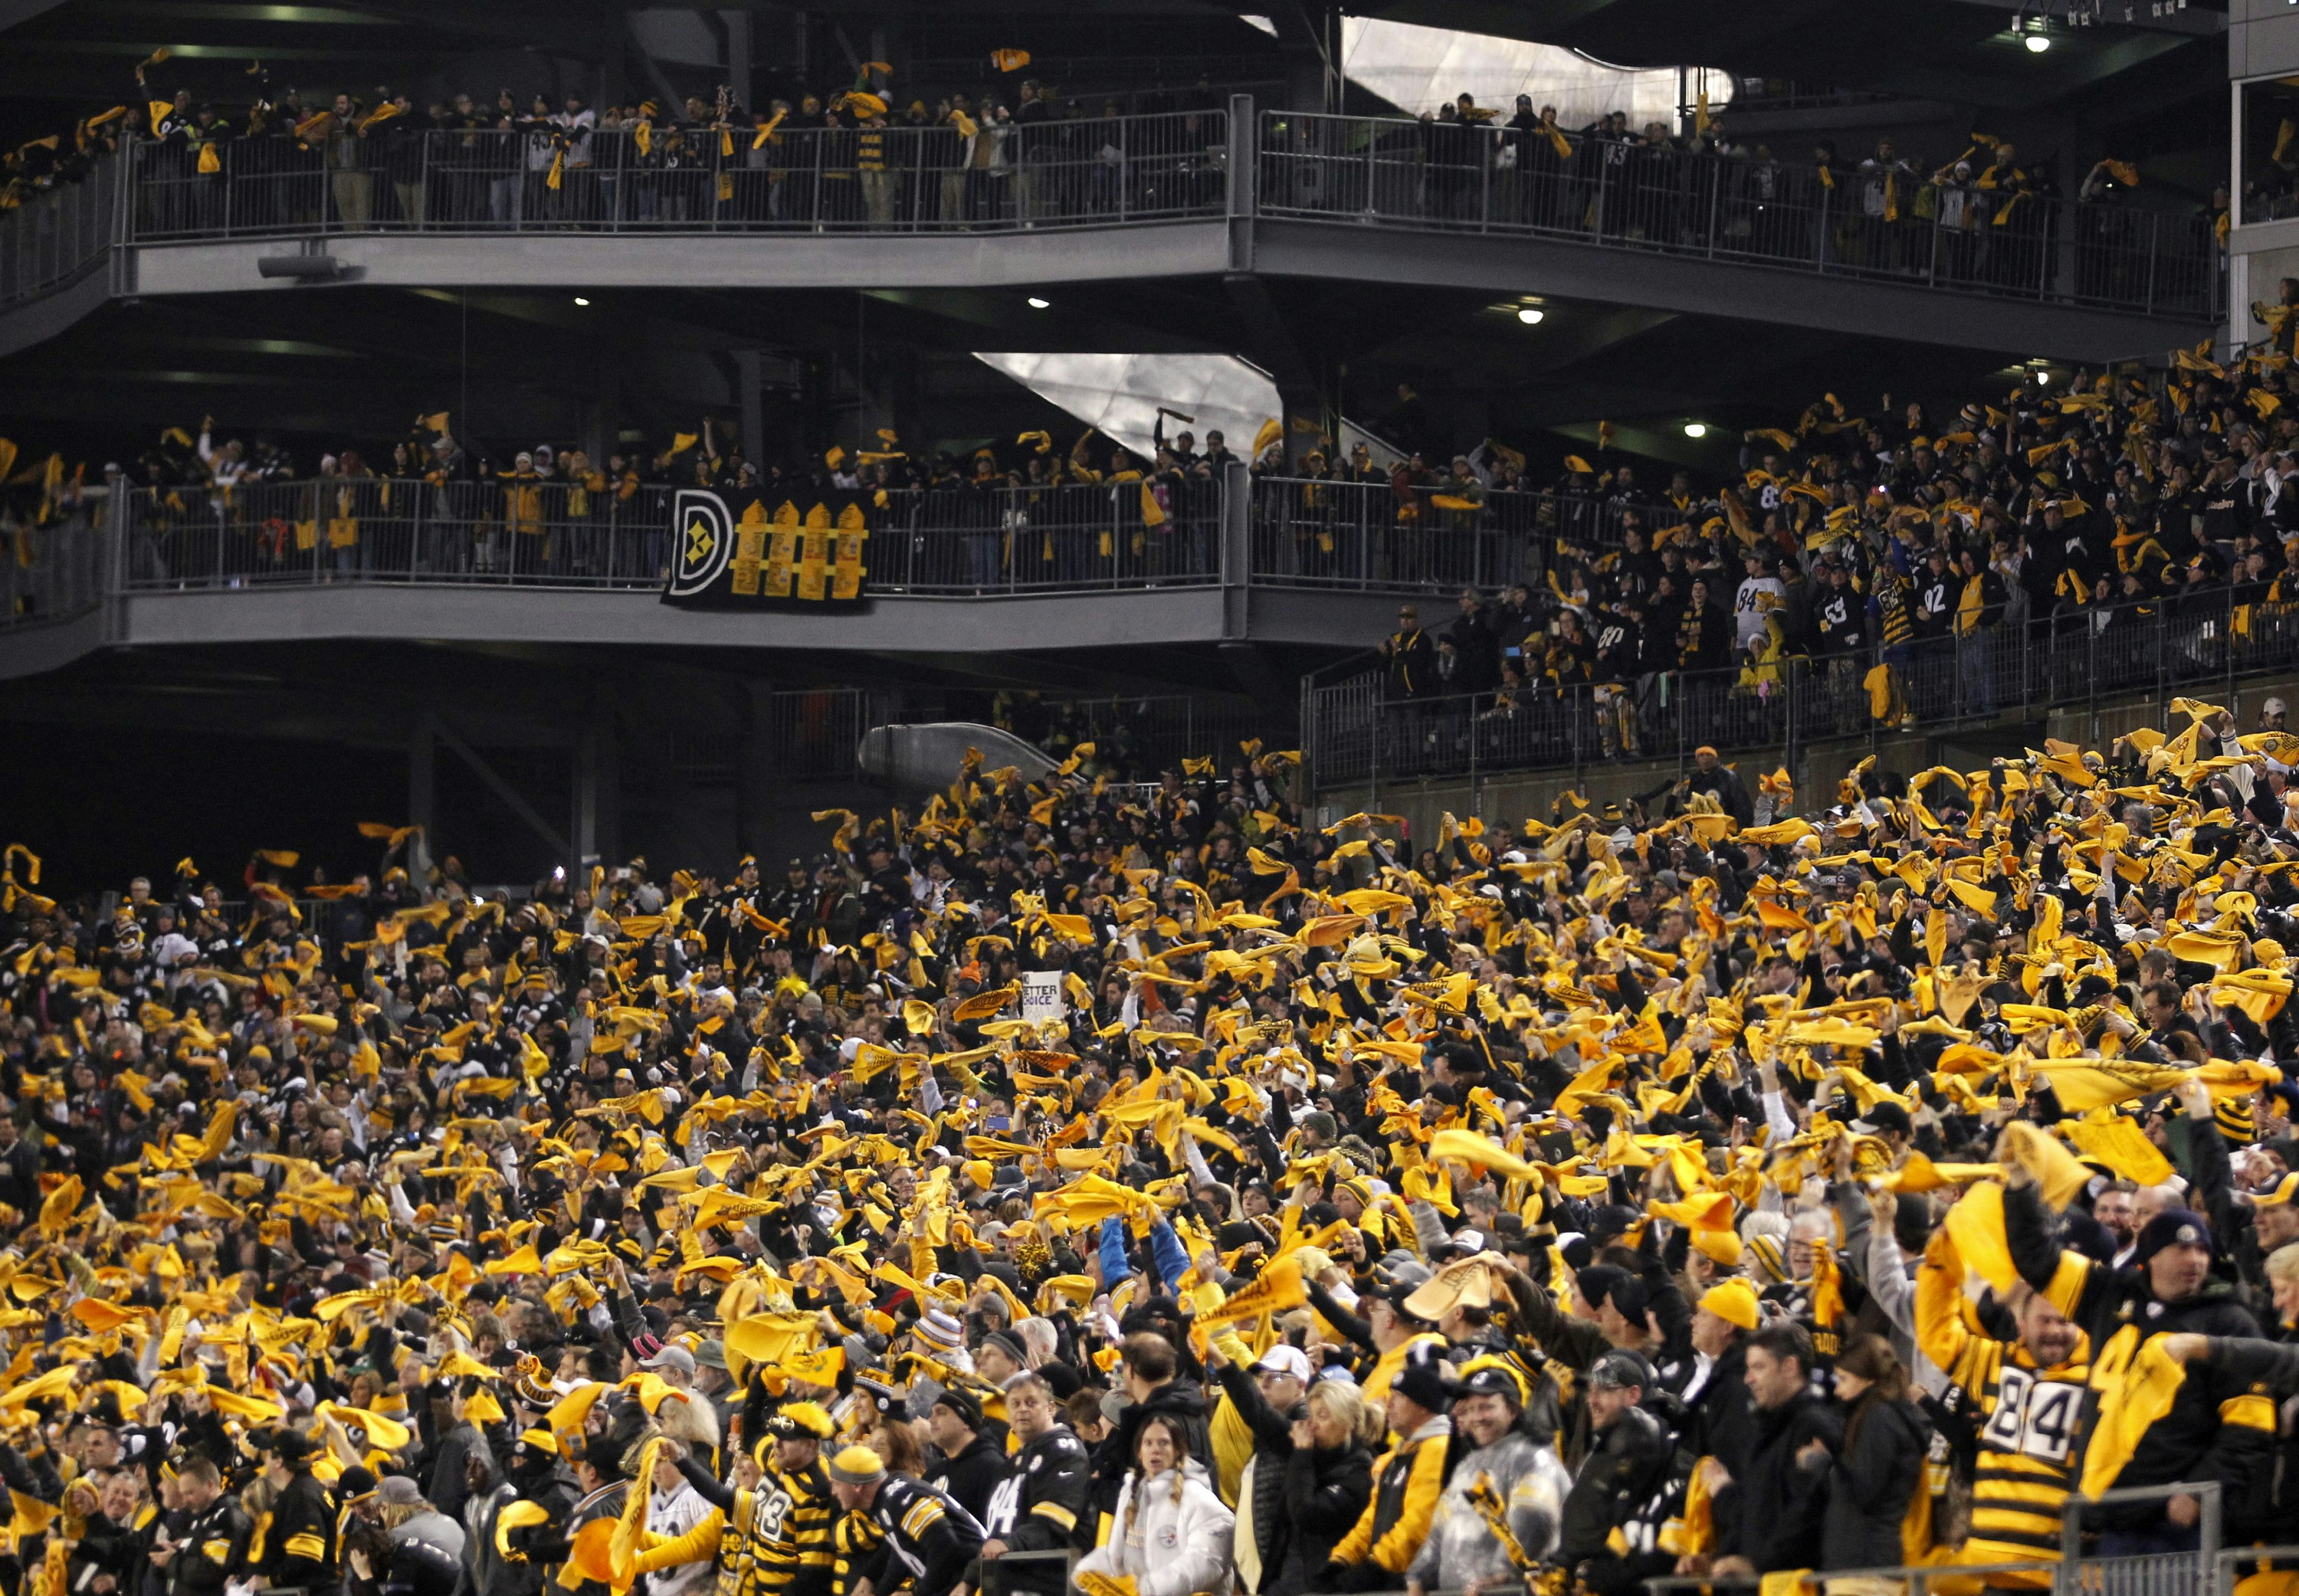 Steeler fans wave their terrible towels during a football game between the Pittsburgh Steelers and the Baltimore Ravens